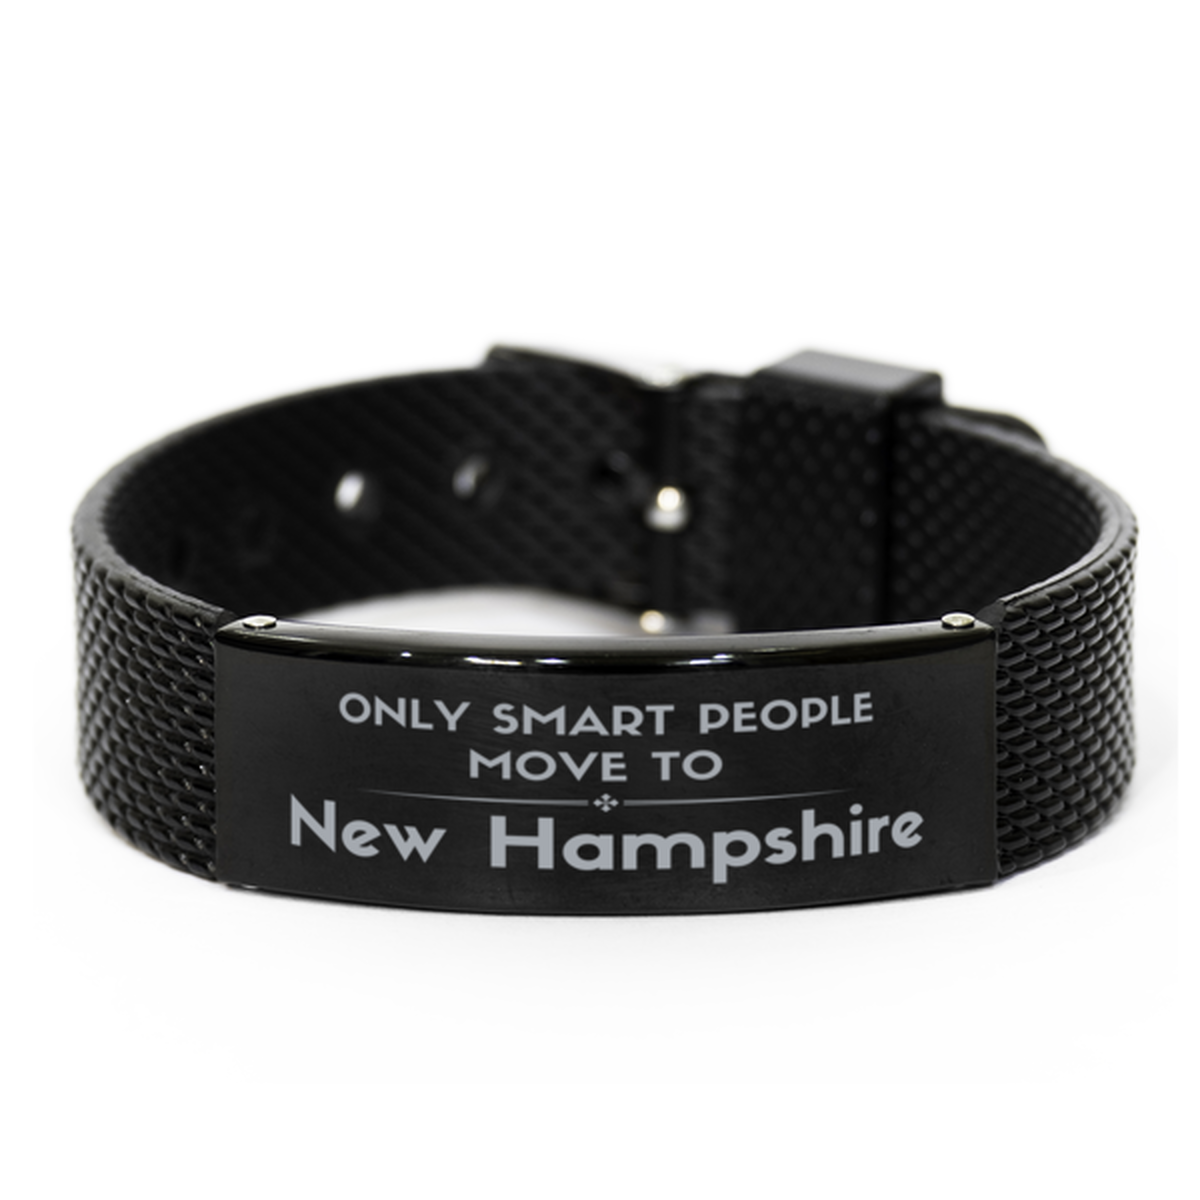 Only smart people move to New Hampshire Black Shark Mesh Bracelet, Gag Gifts For New Hampshire, Move to New Hampshire Gifts for Friends Coworker Funny Saying Quote